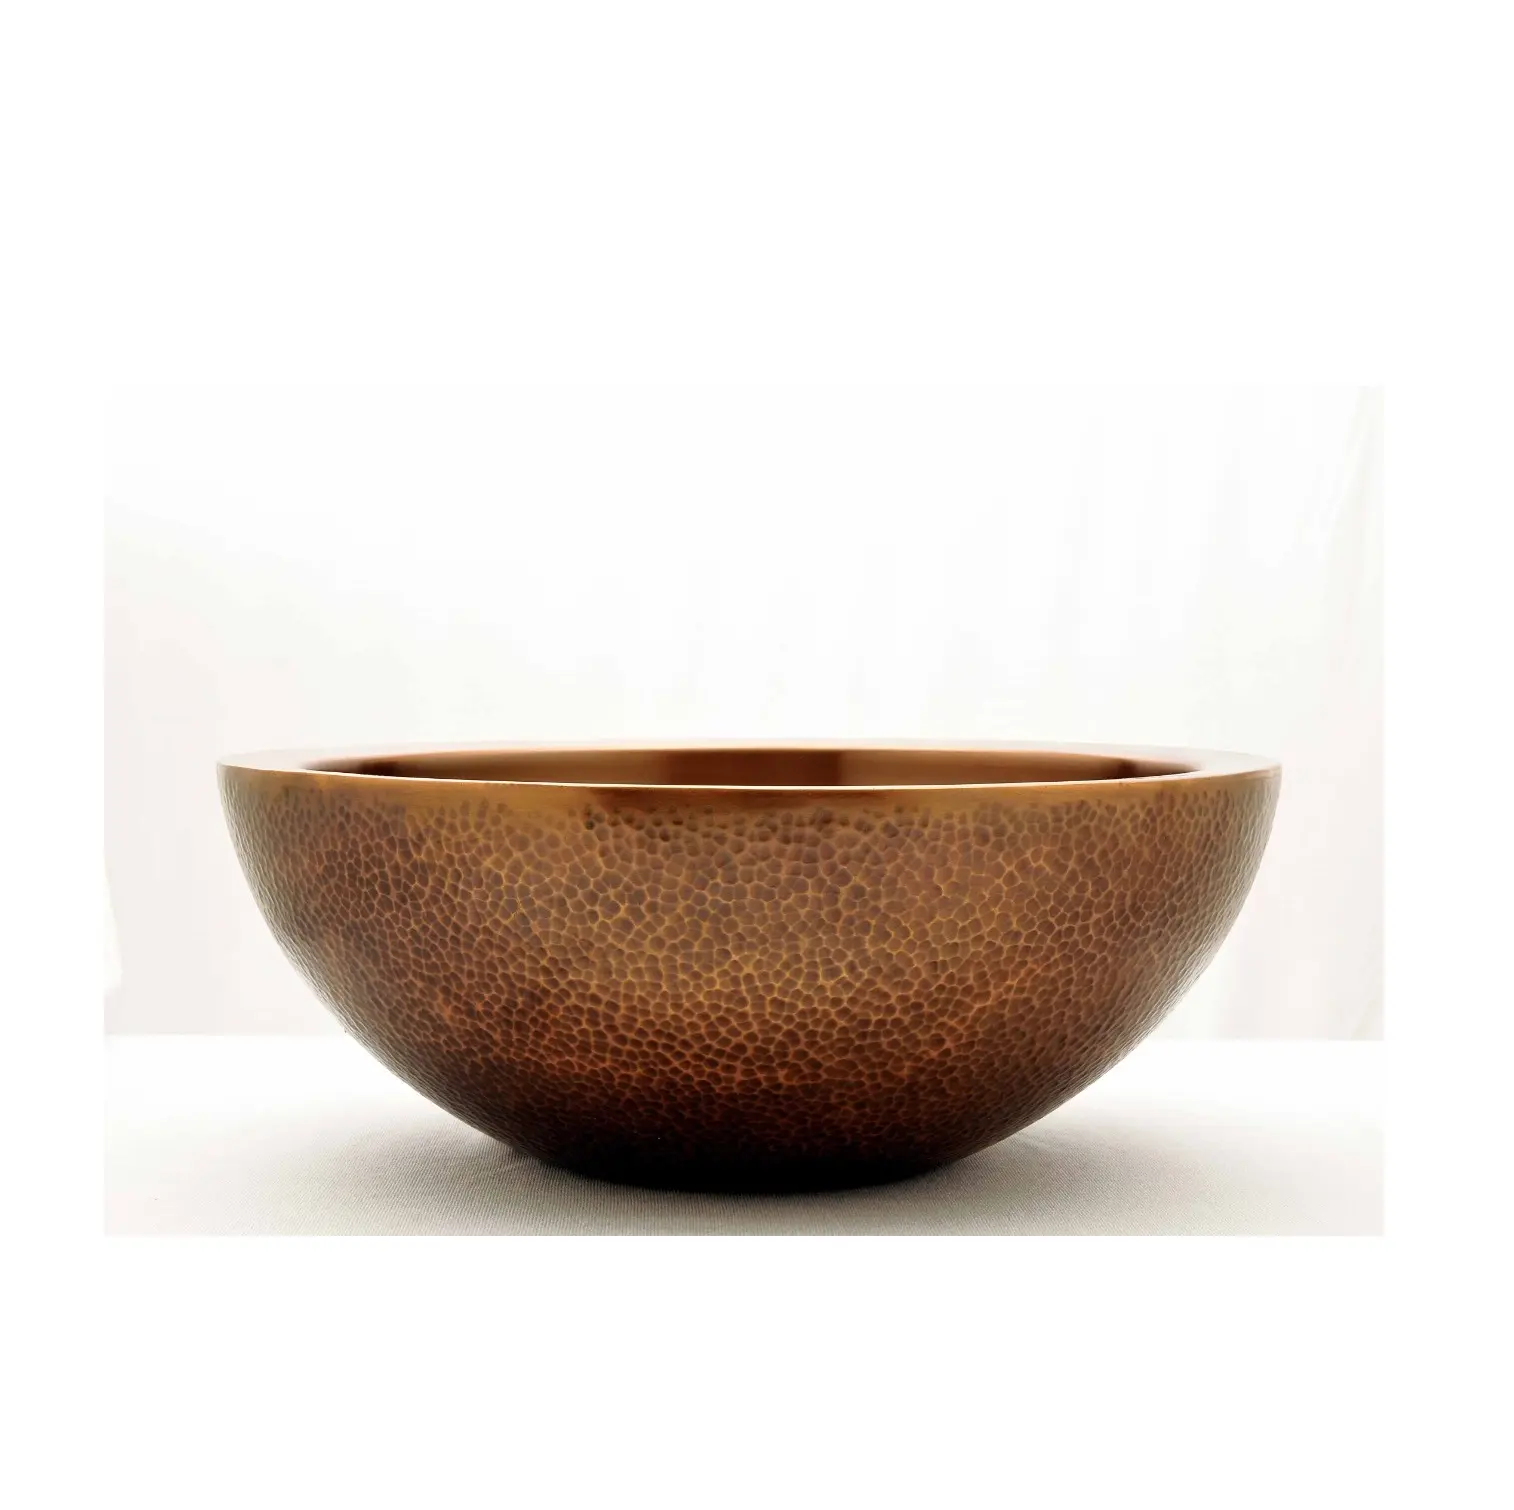 Double Walled Outside Hammered Copper Sink Handcrafted Copper Wash Basin for Luxury to Your Bathroom Available for Sale